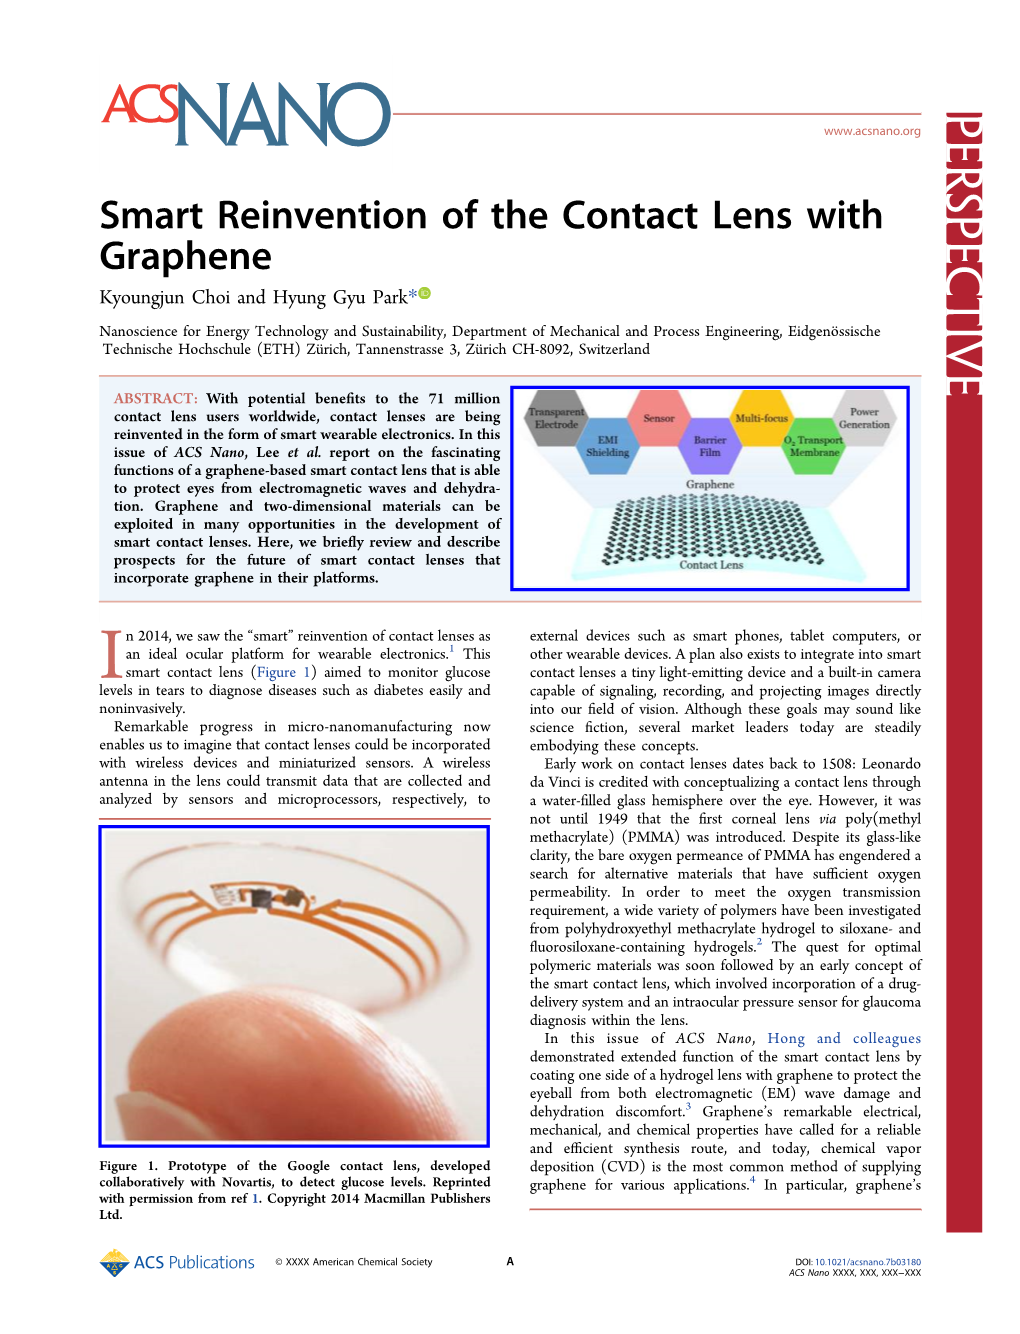 Smart Reinvention of the Contact Lens with Graphene